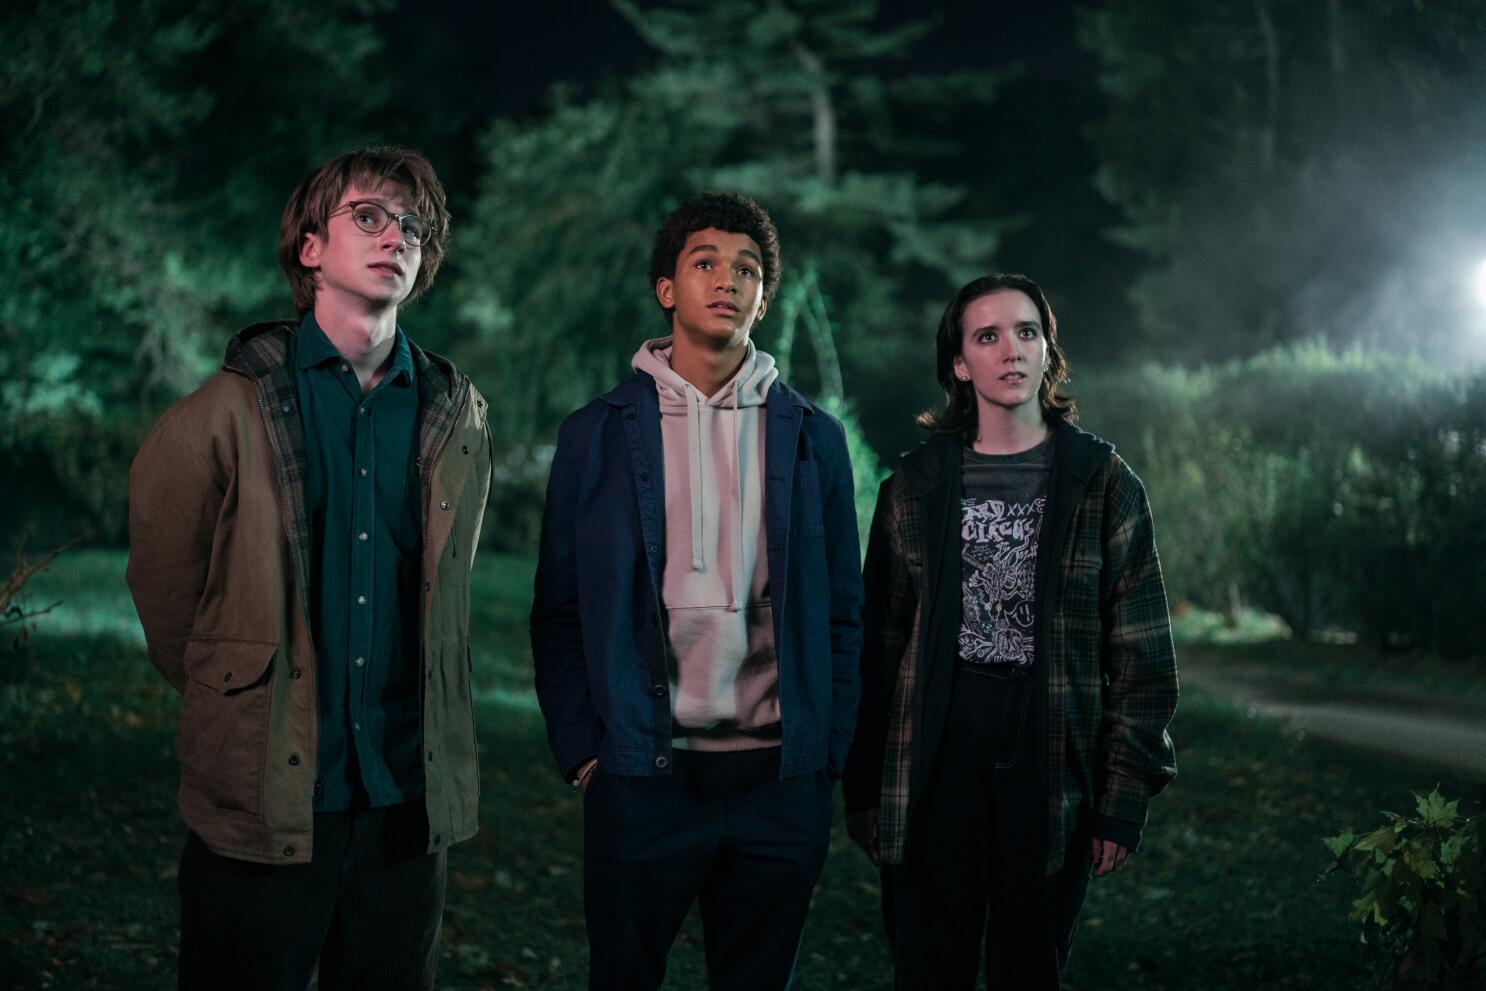 Review: Netflix's Dead Kids Mixes High School Drama With The